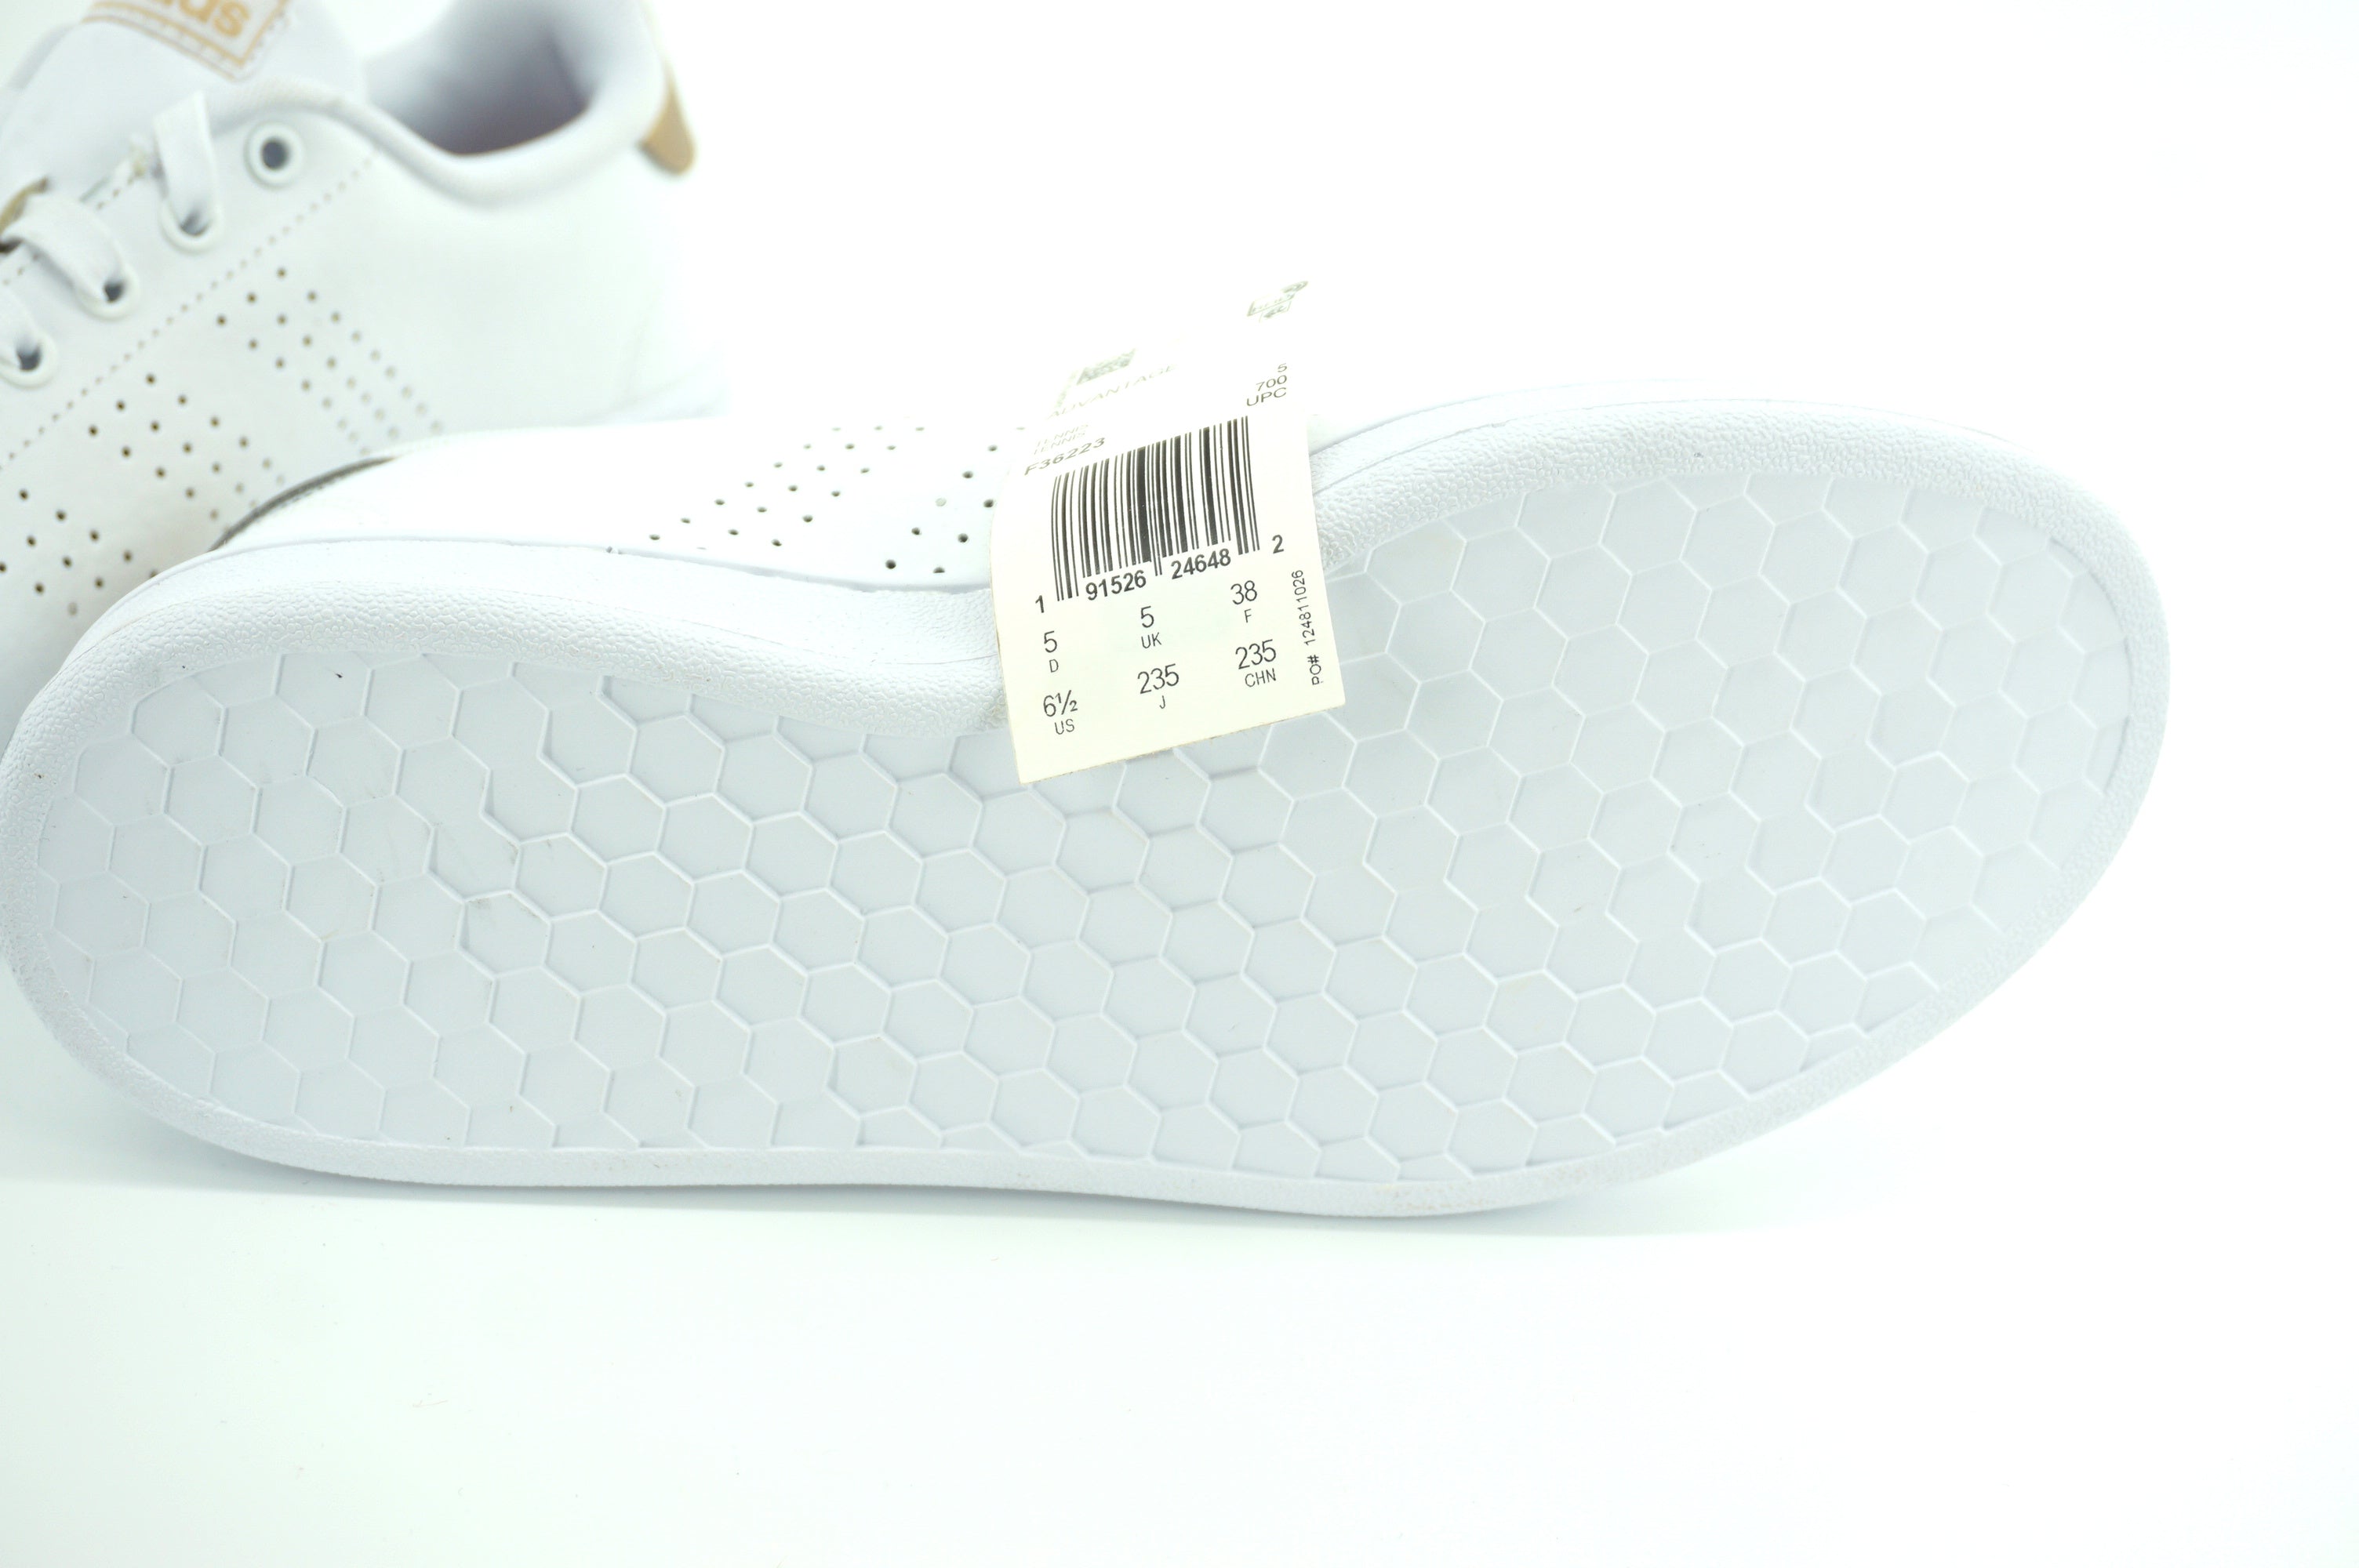 Adidas Women Avantage White Leather Lace-Up Sneaker Size 6.5 striped